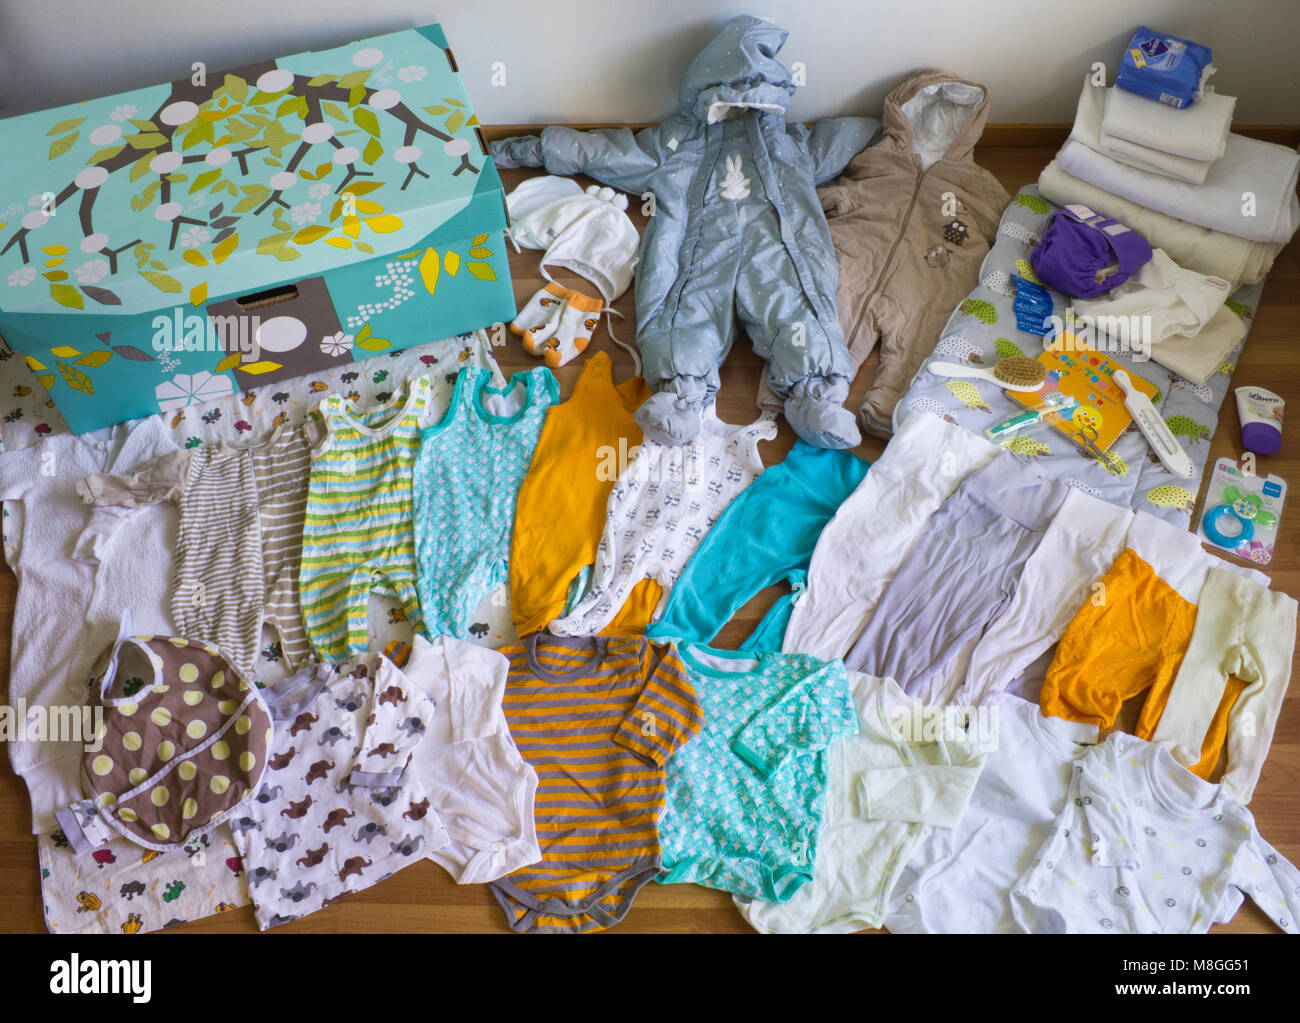 All the Finnish baby box contents spread out Stock Photo